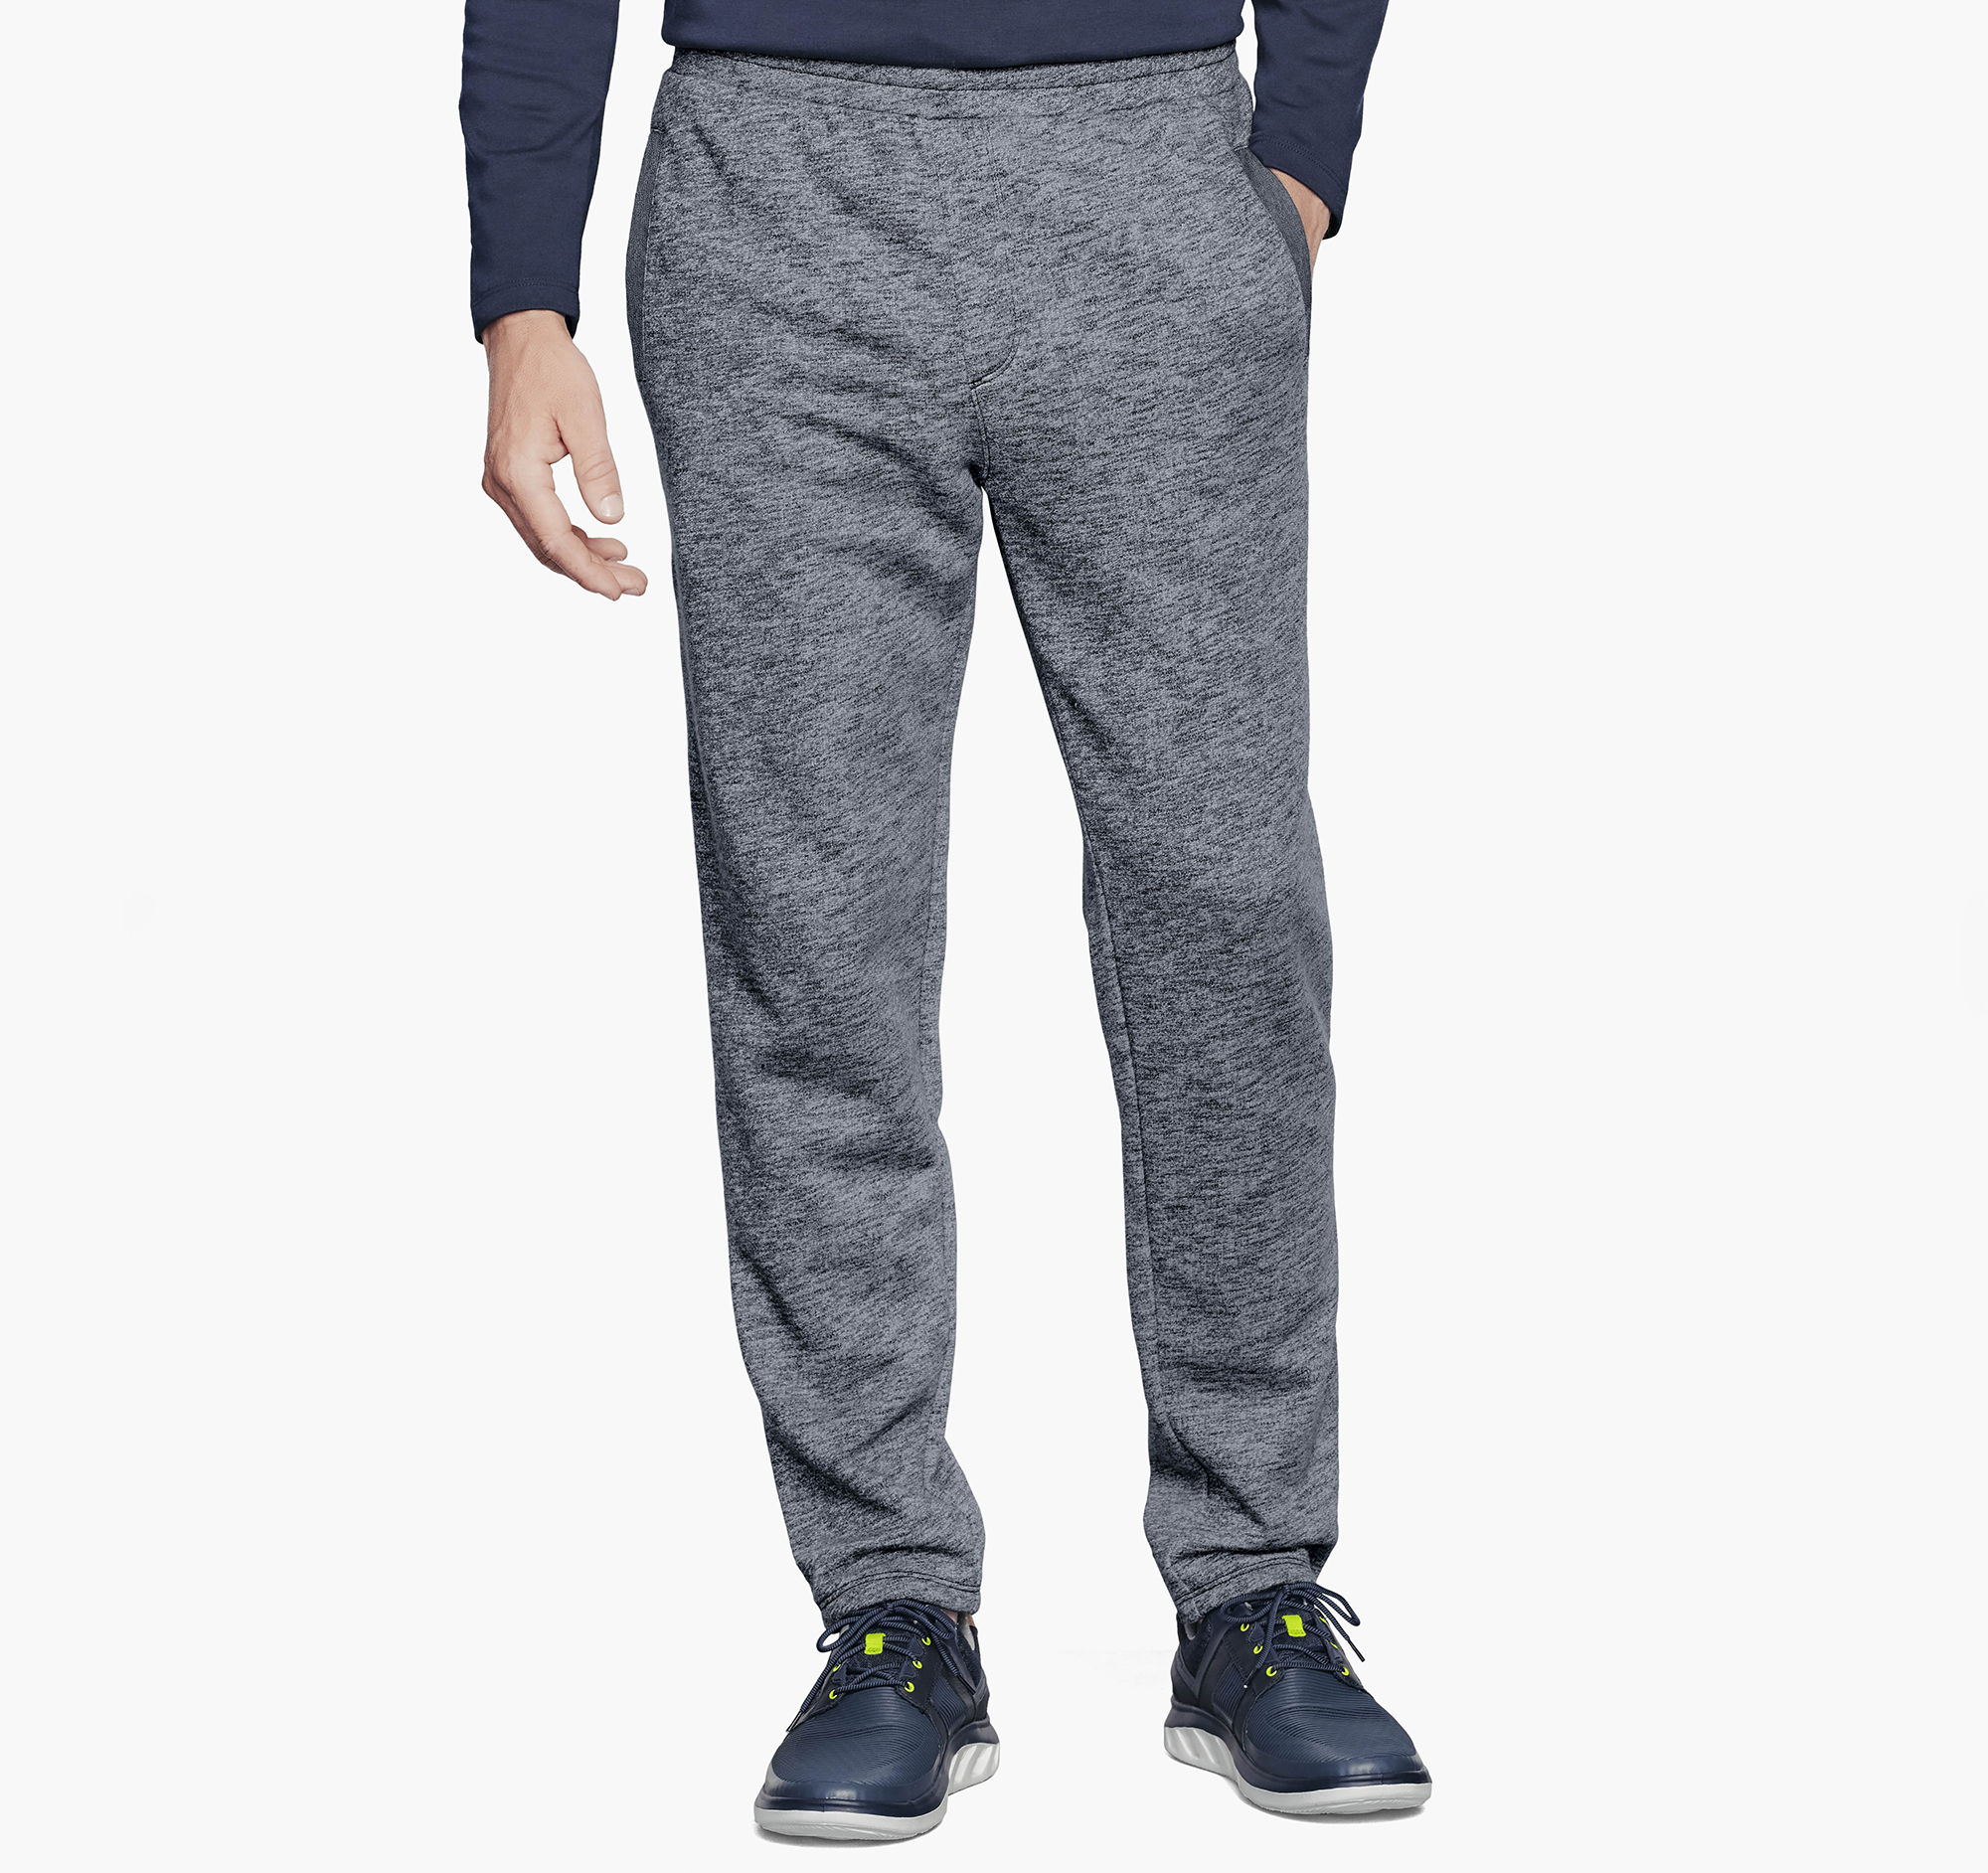 Image of Johnston & Murphy French Terry Knit Pants